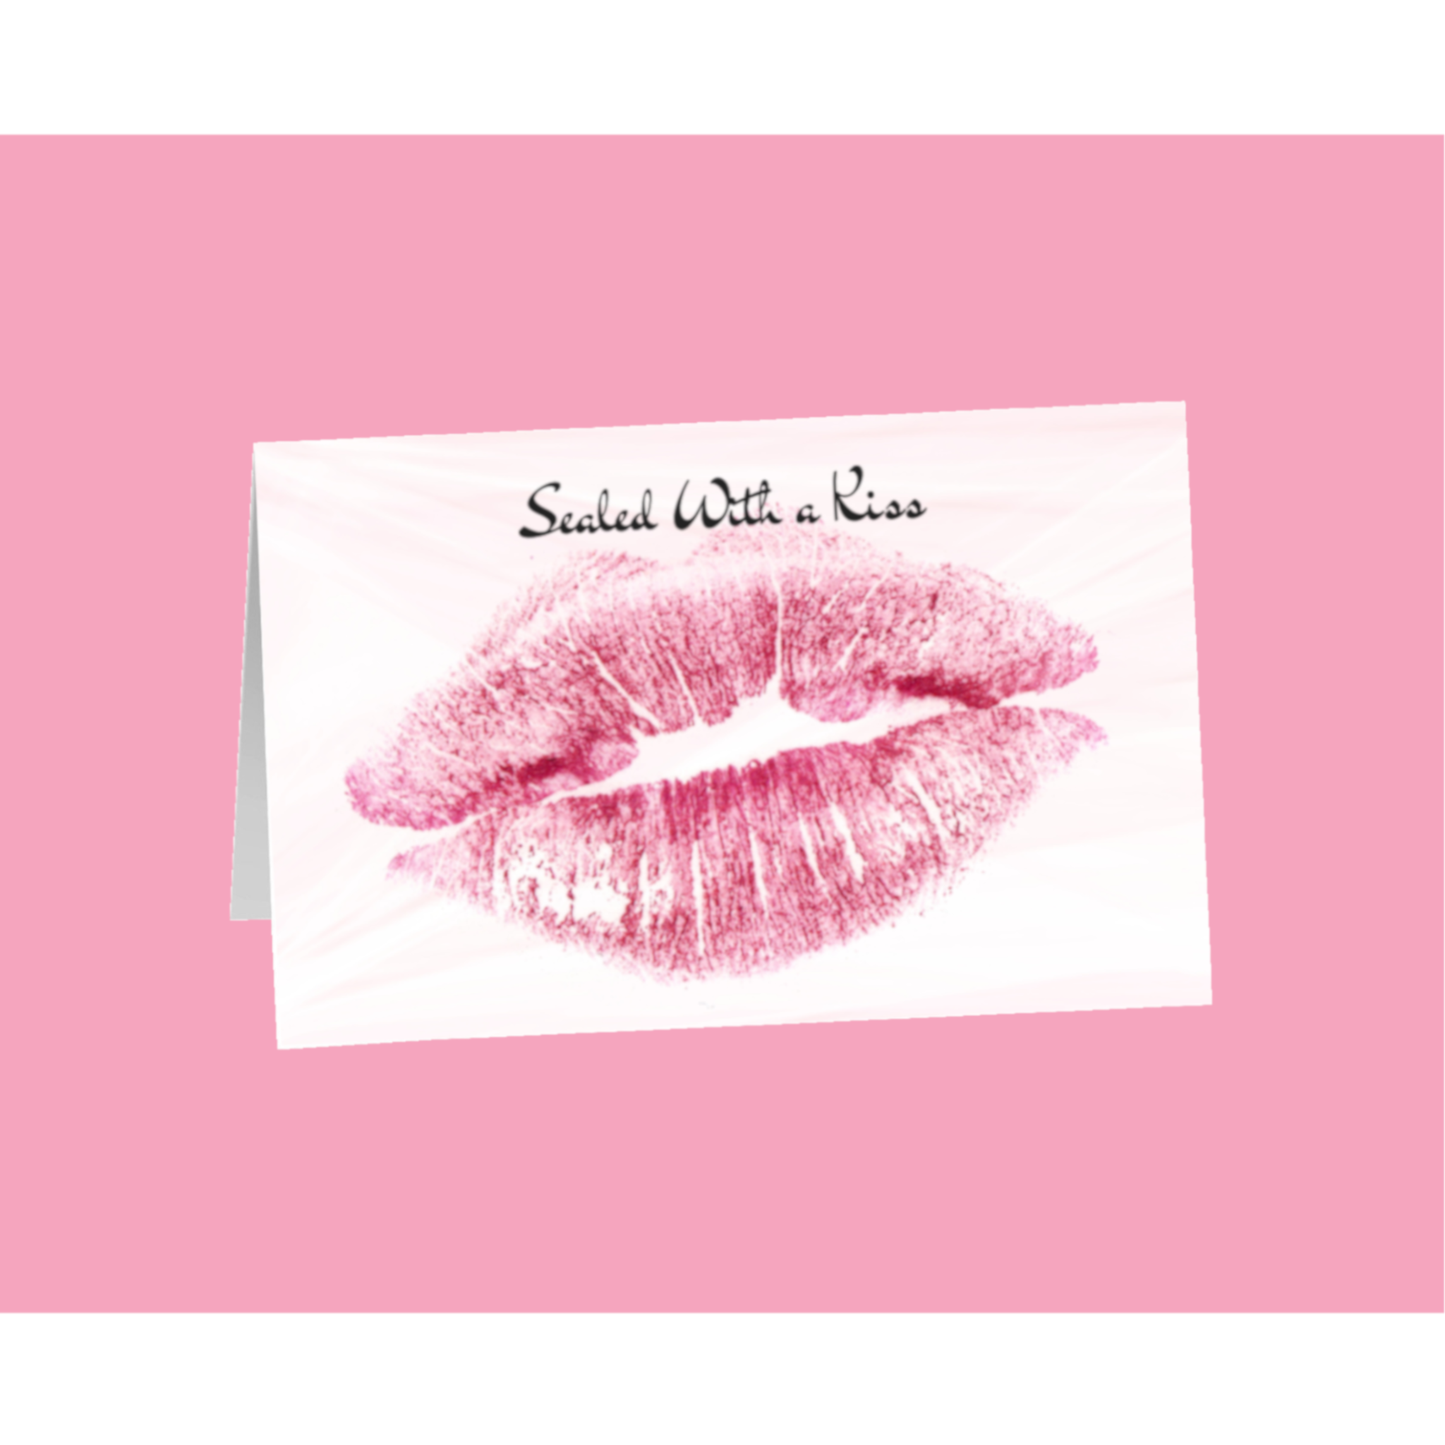 Sealed With a Kiss 8.5x5.5 Greeting Card